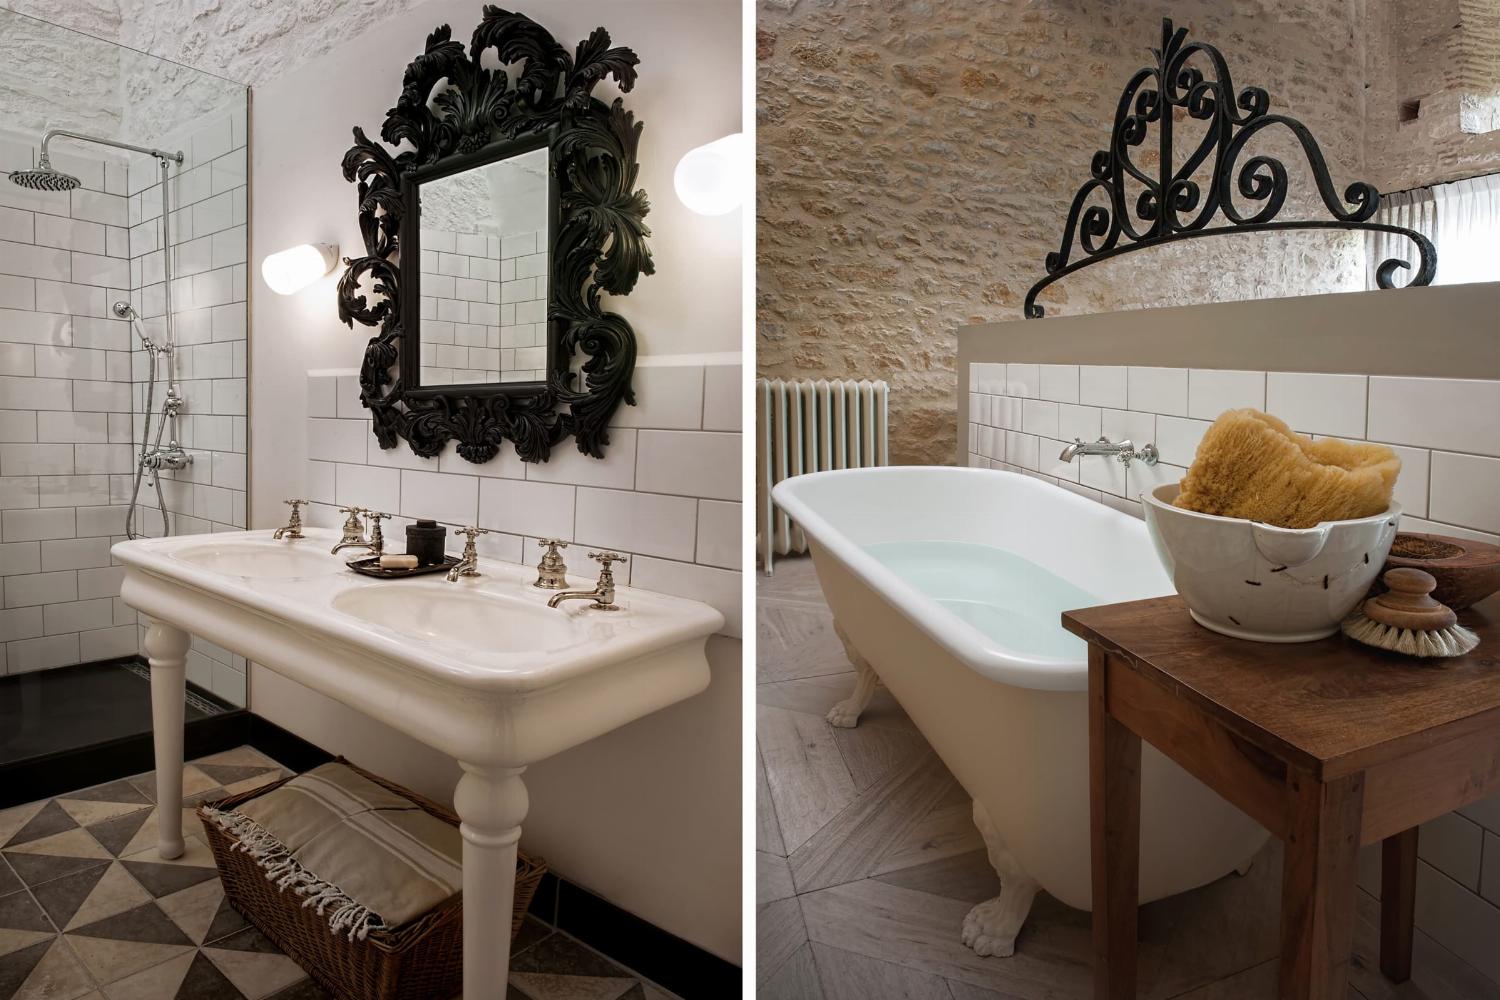 Bathroom | Holiday cottage in South West France